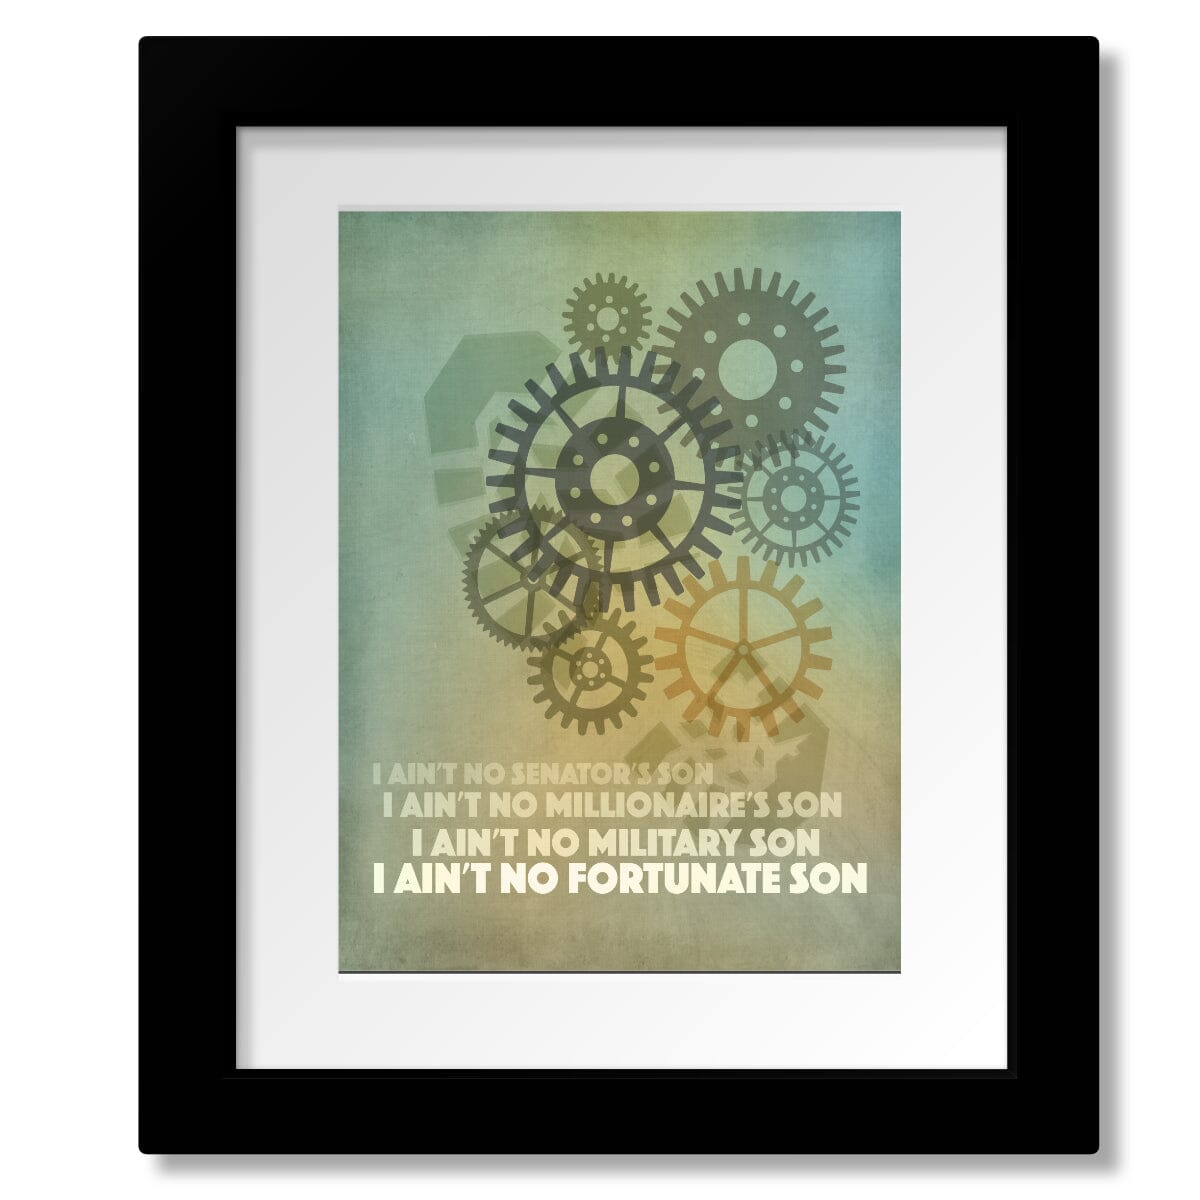 Fortunate Son by Creedence Clearwater Revival - Lyric Art Song Lyrics Art Song Lyrics Art 8x10 Matted and Framed Print 